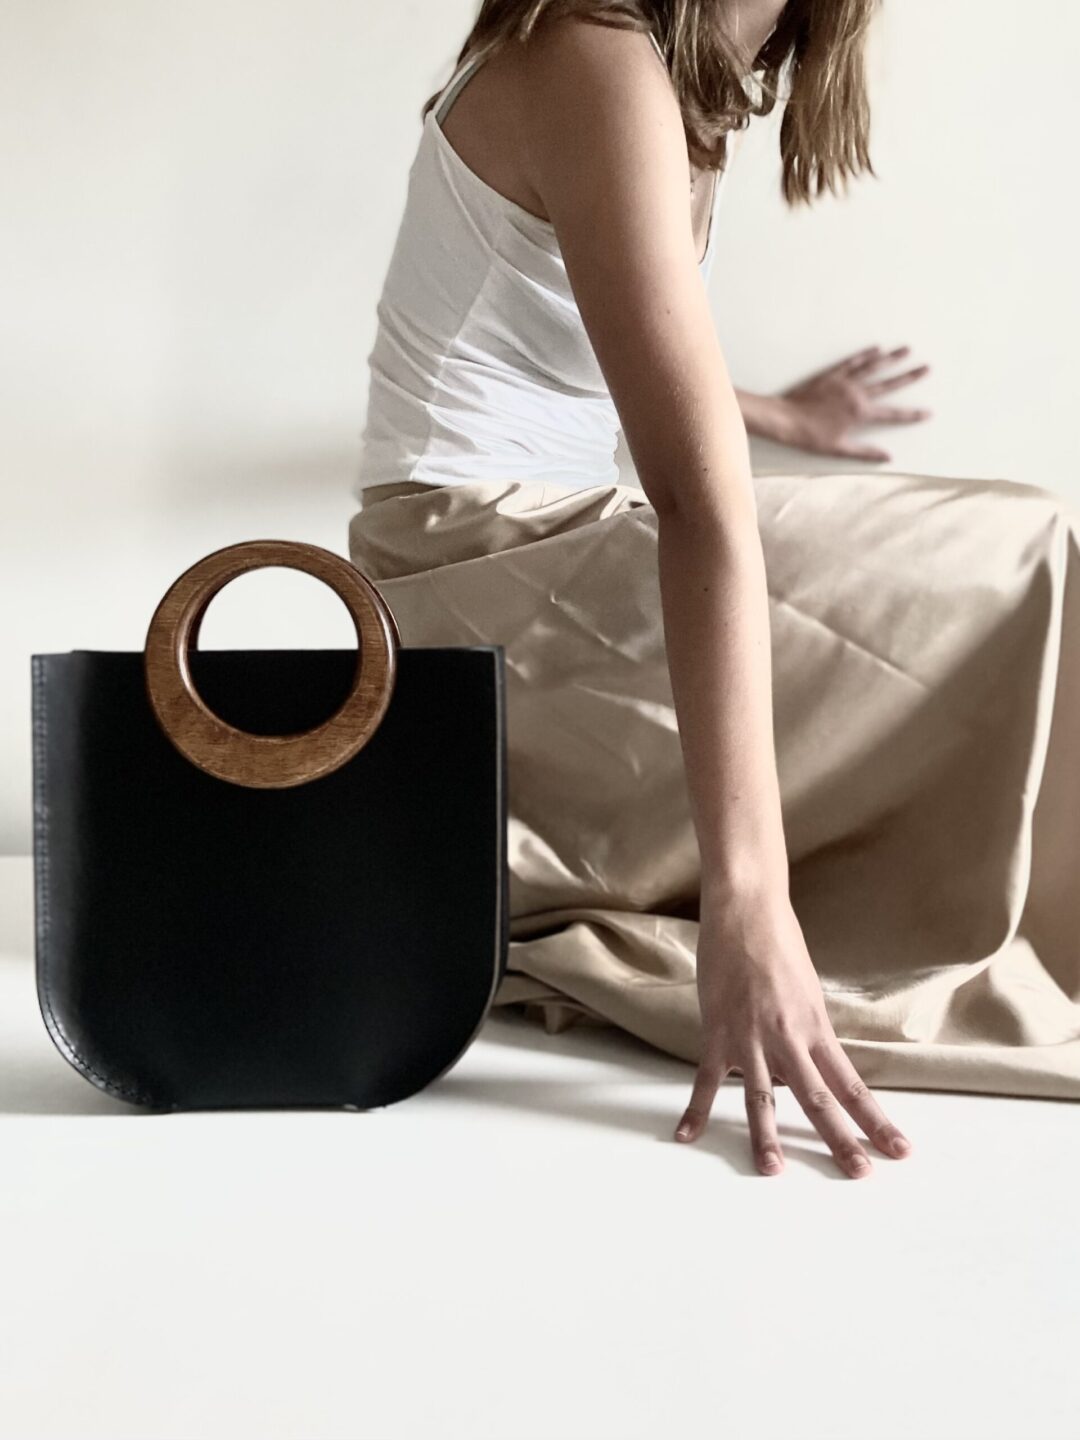 Hand-stitched Bag with Wooden Handles LINFIN Maastricht